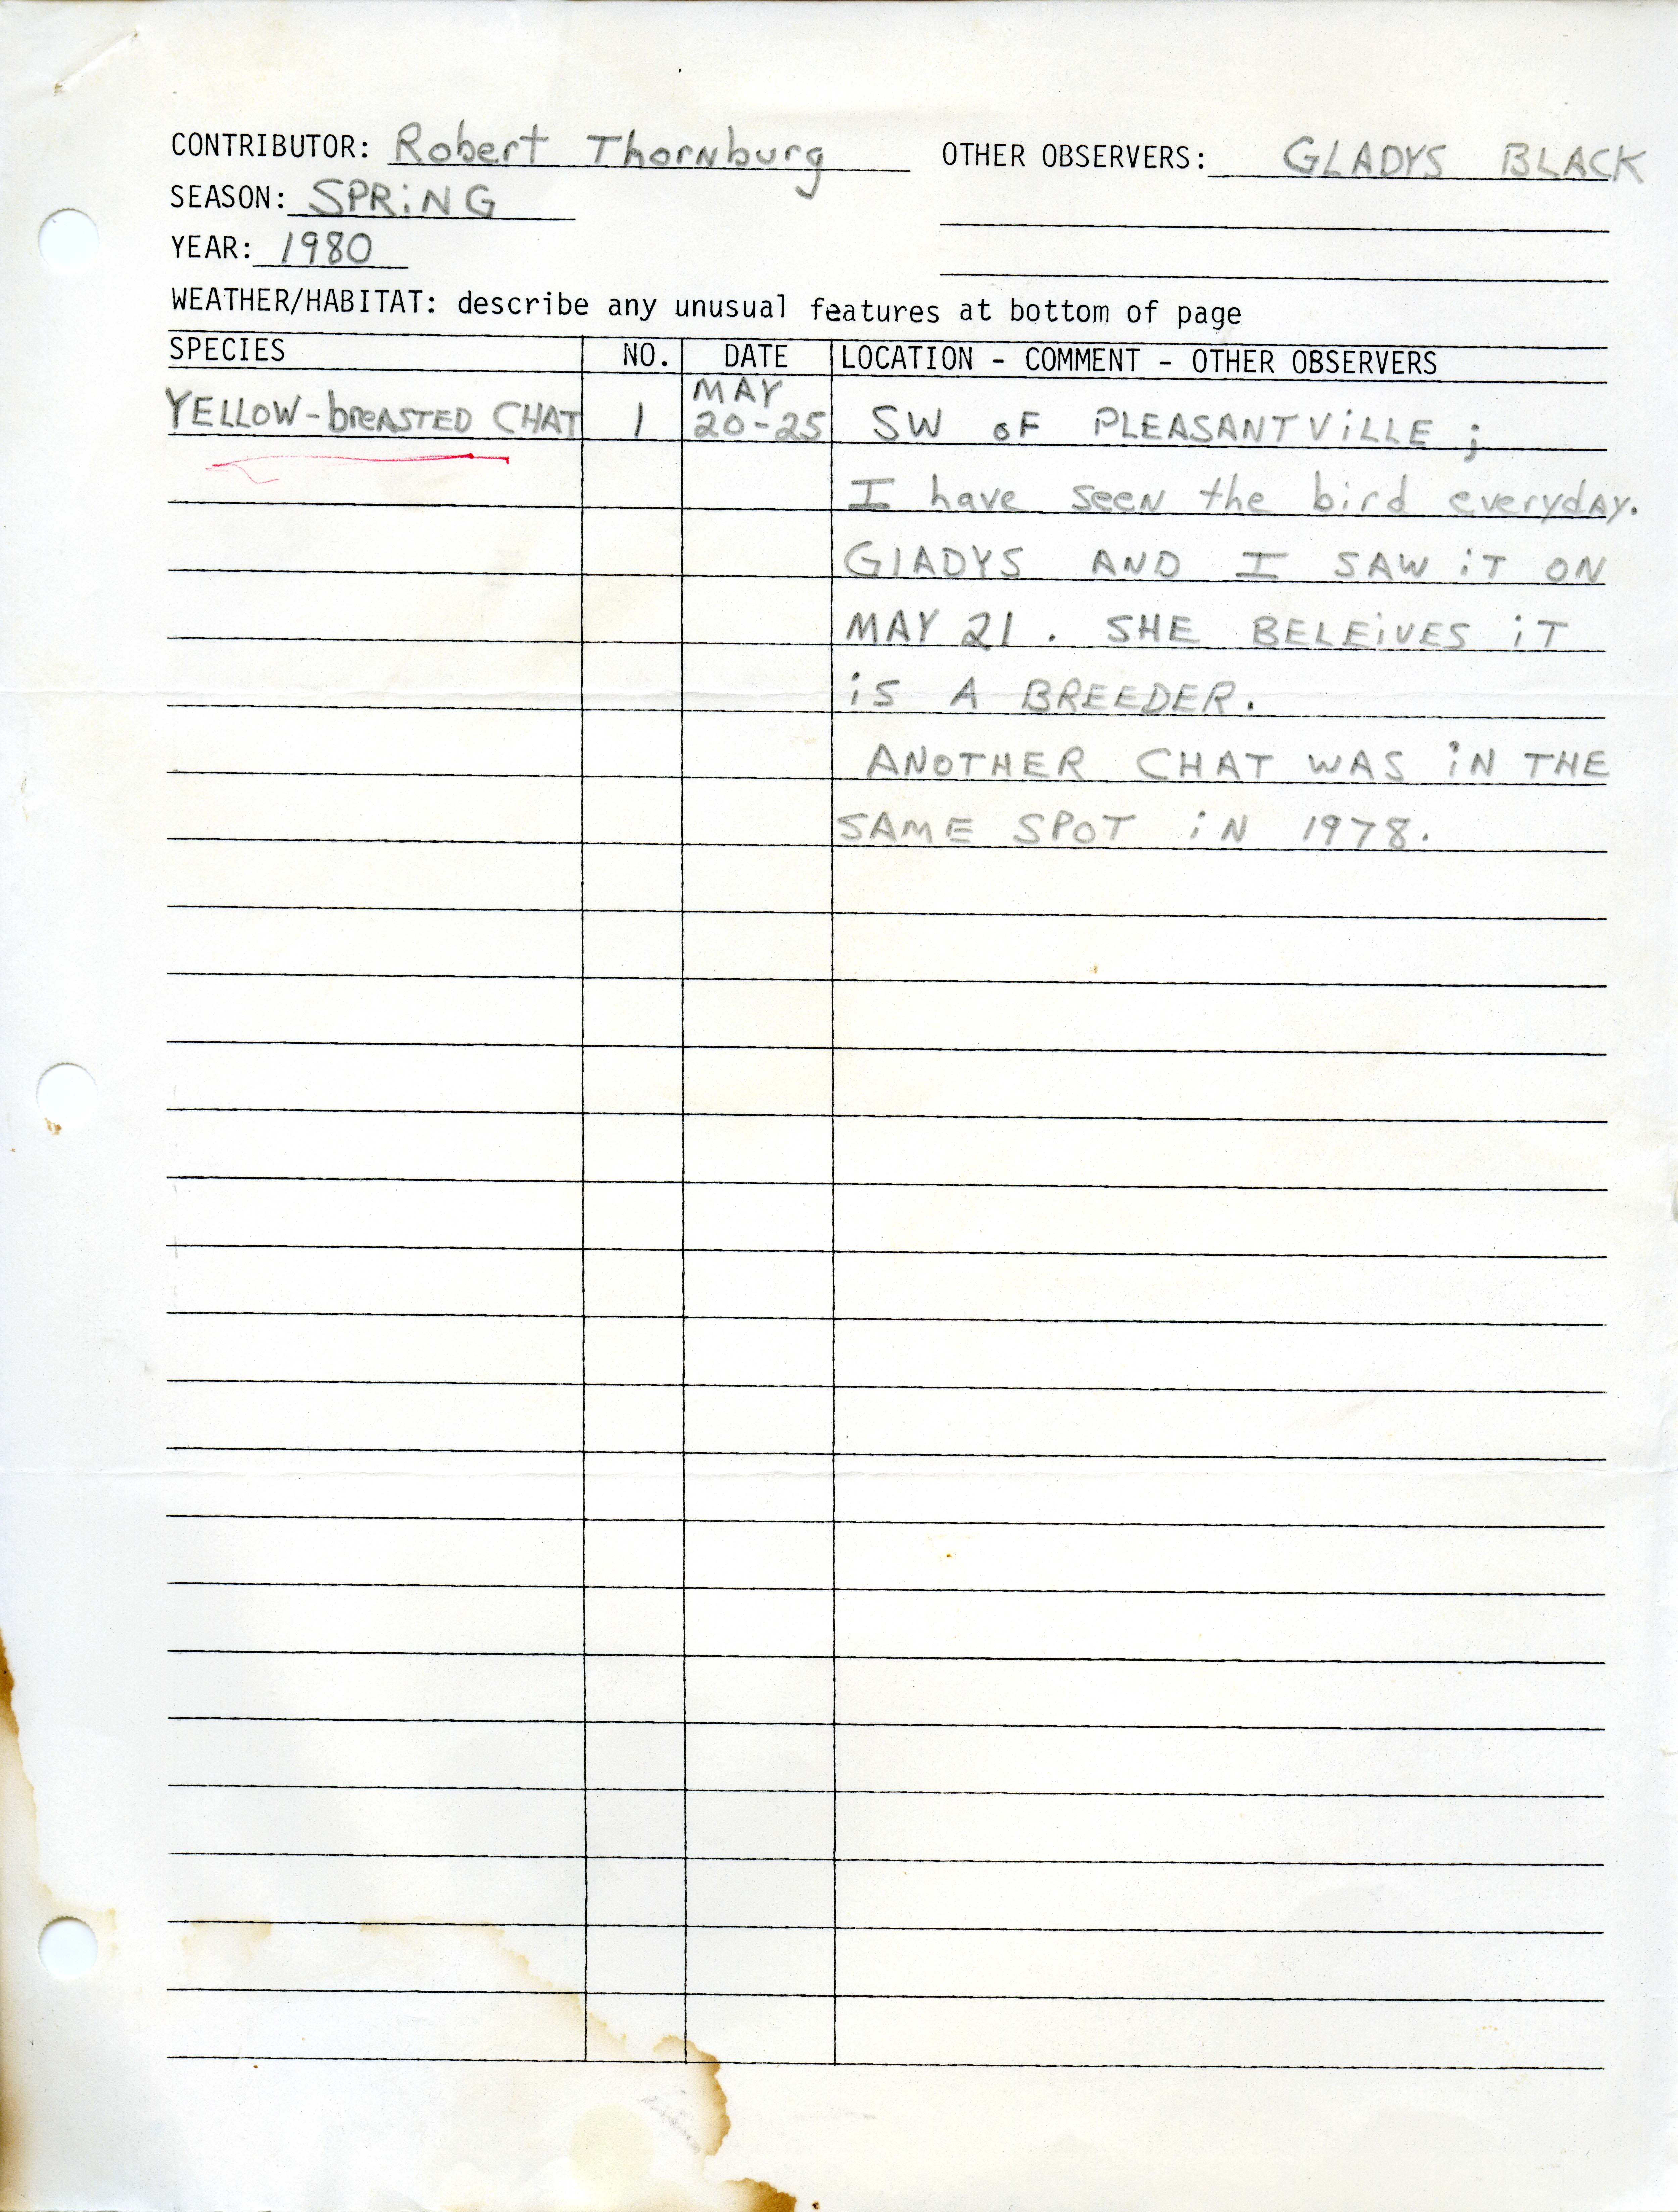 Field notes contributed by Robert E. Thornburg, spring 1980